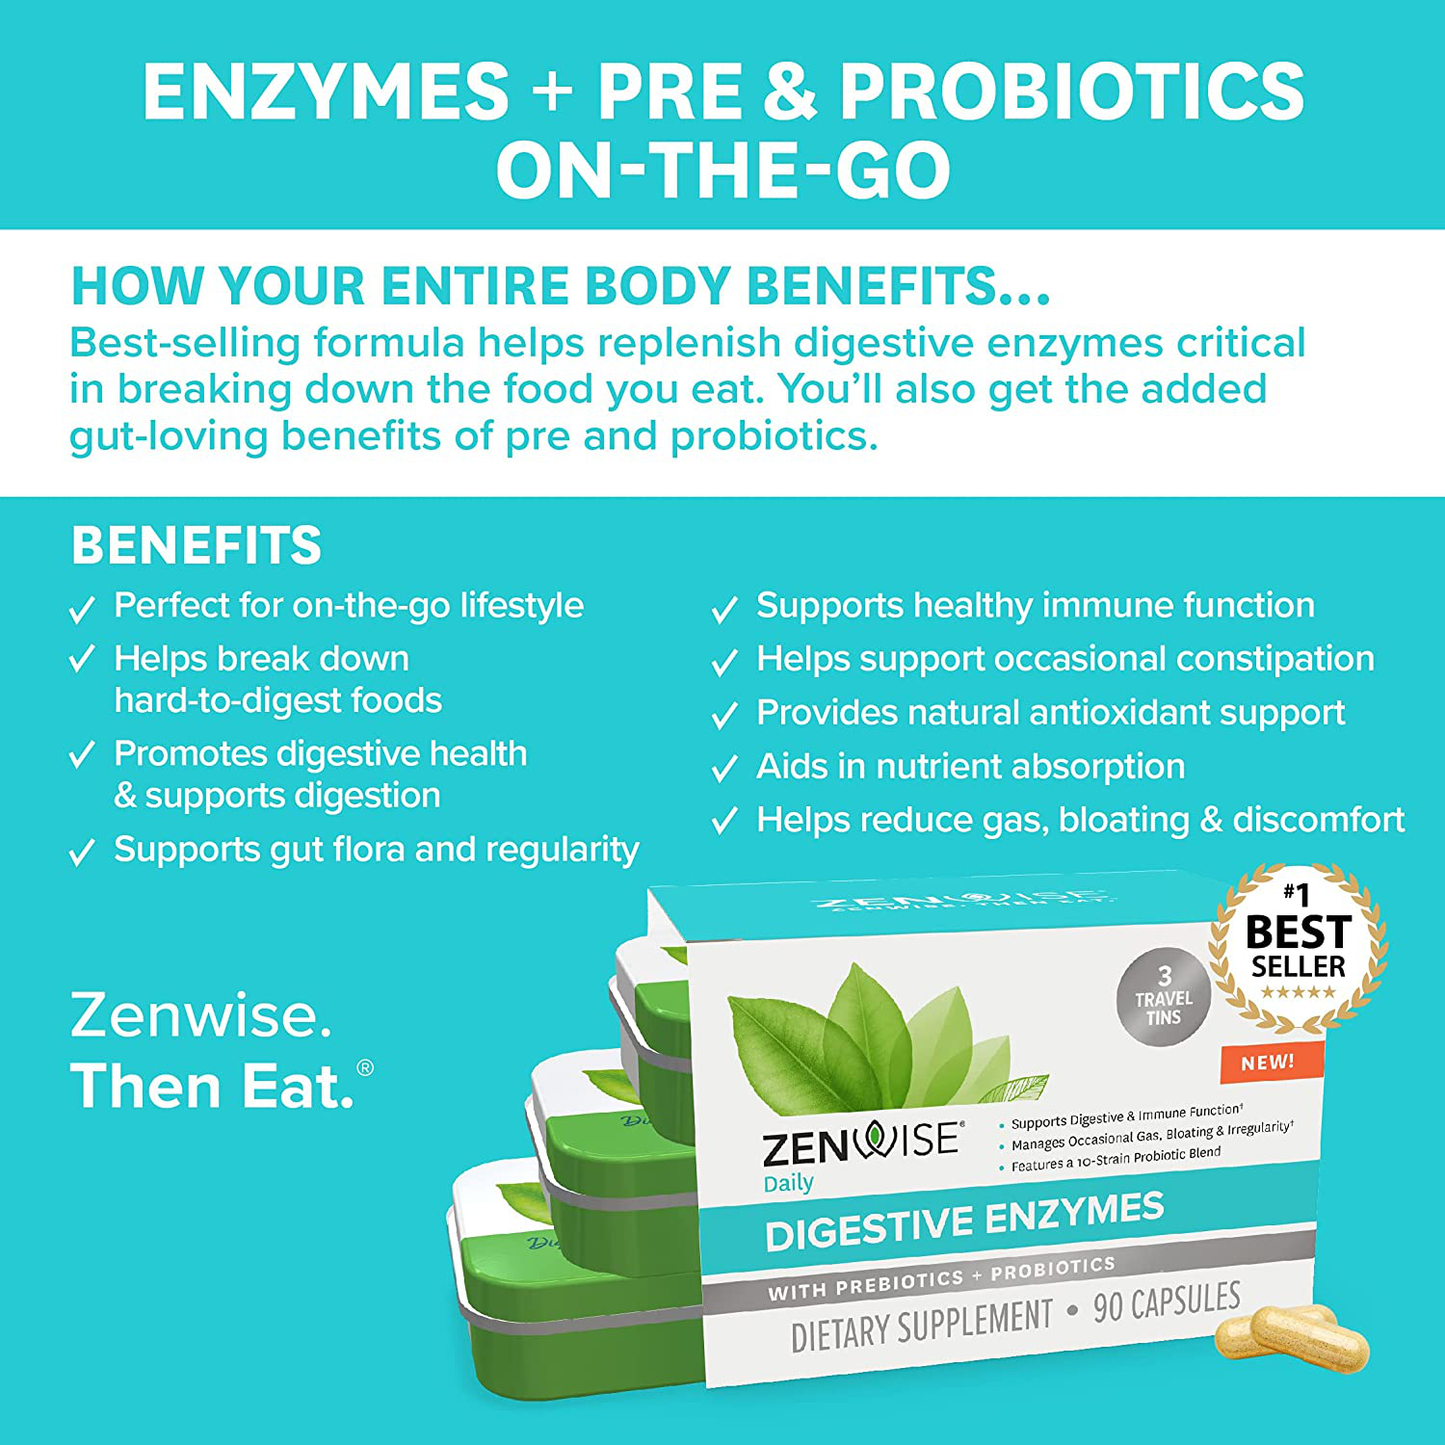 Zenwise Digestive Enzymes Probiotics and Prebiotics - Digestion and Bloating Relief for Women and Men, Lactose Absorption with Amylase & Bromelain